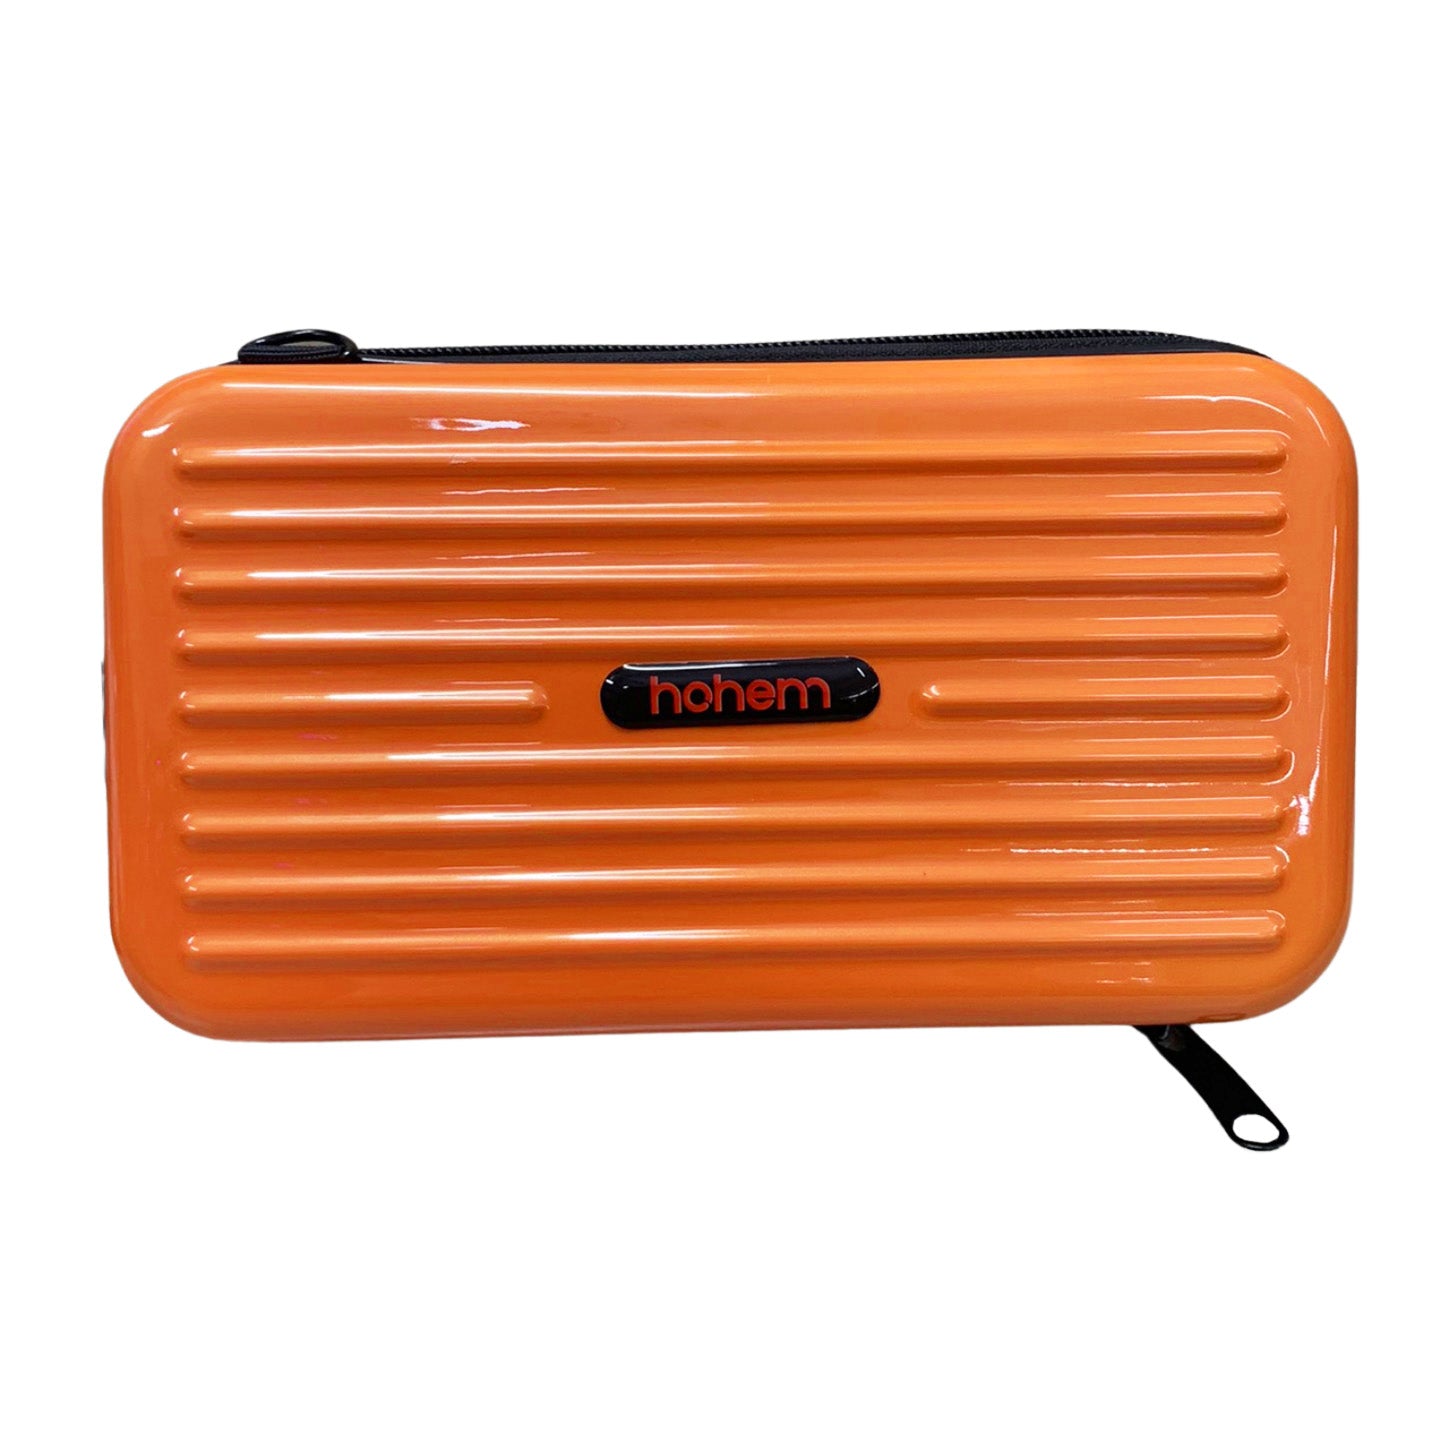 Hohem GC1 Hard Case Luggage Inspired Carrying Pouch with Strap Mini Trunk - Available in Black and Orange